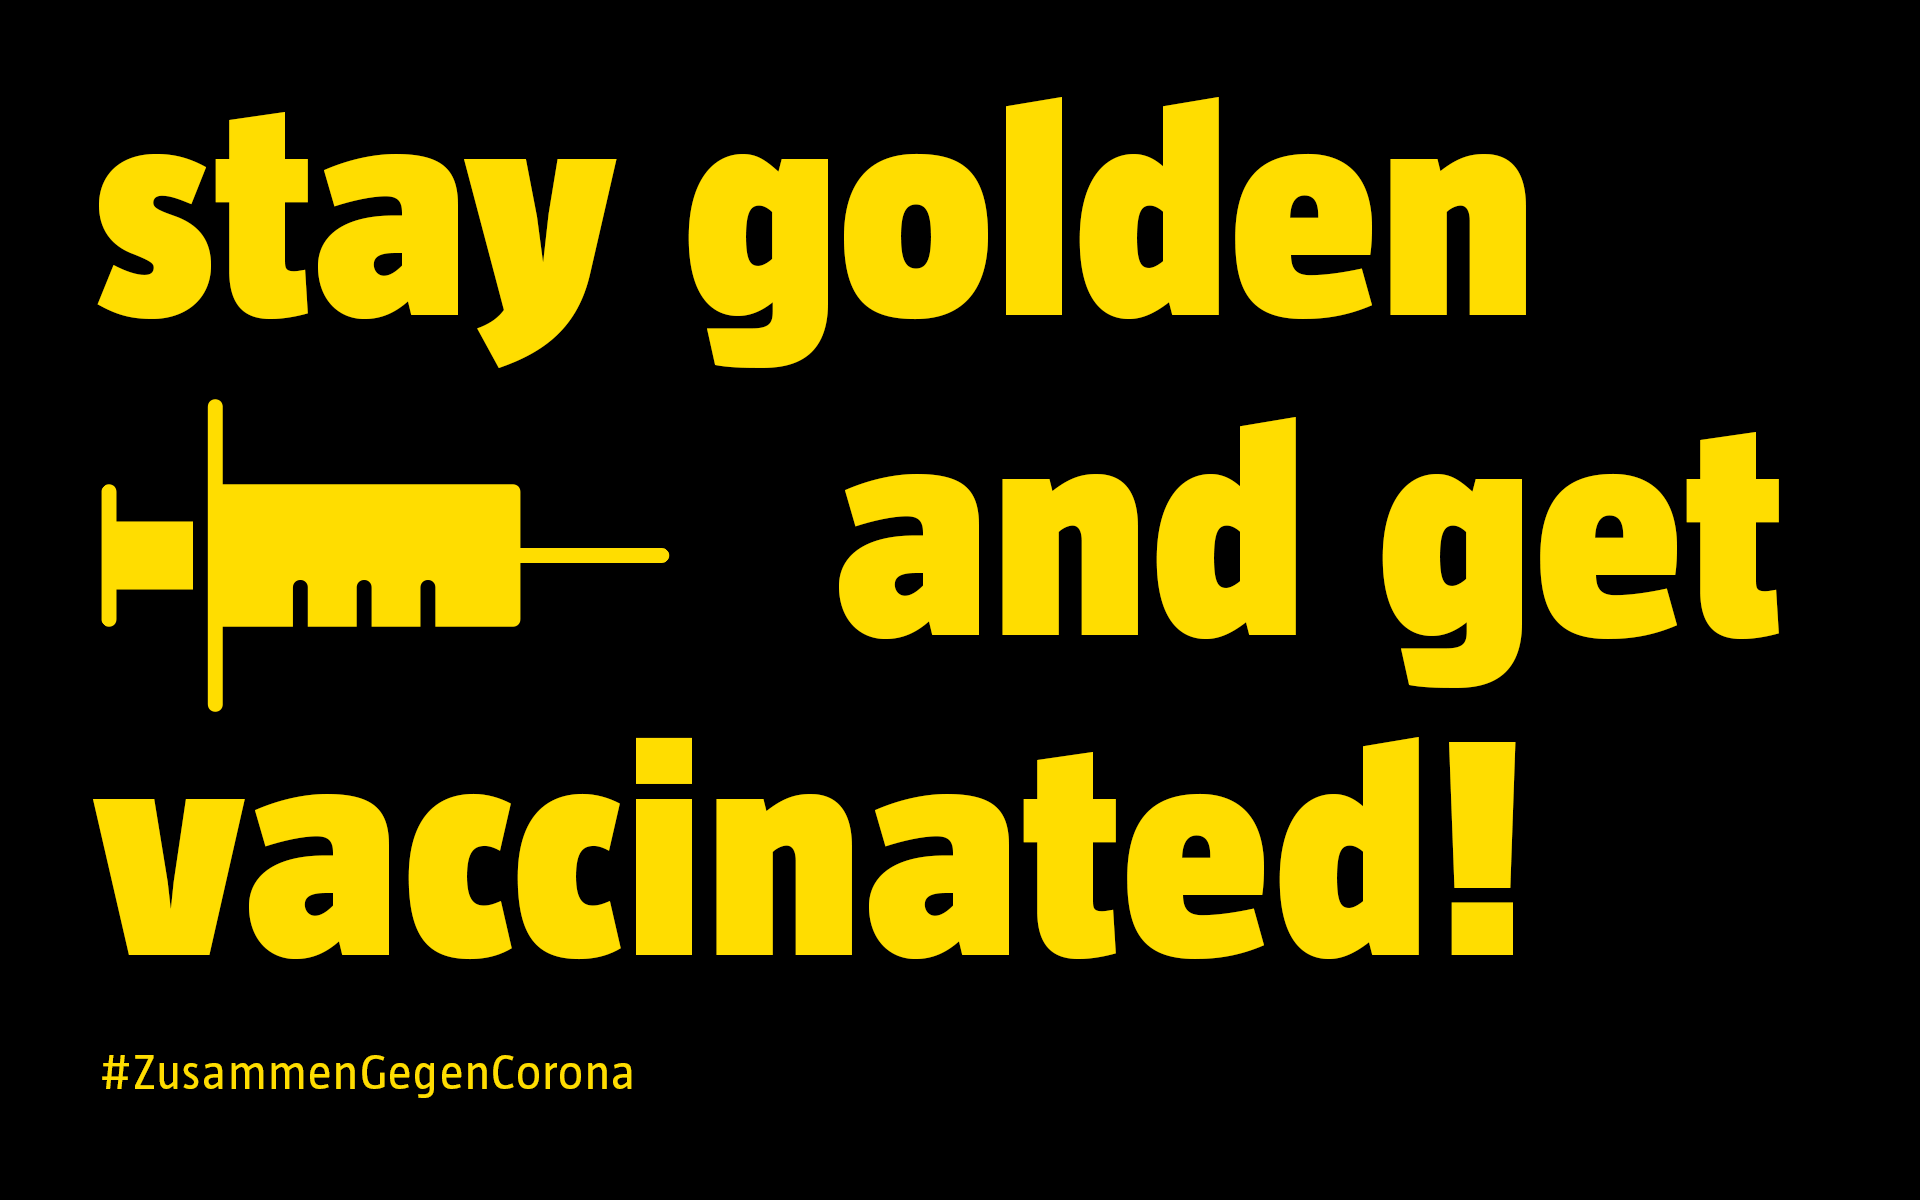 stay golden and get vaccinated!